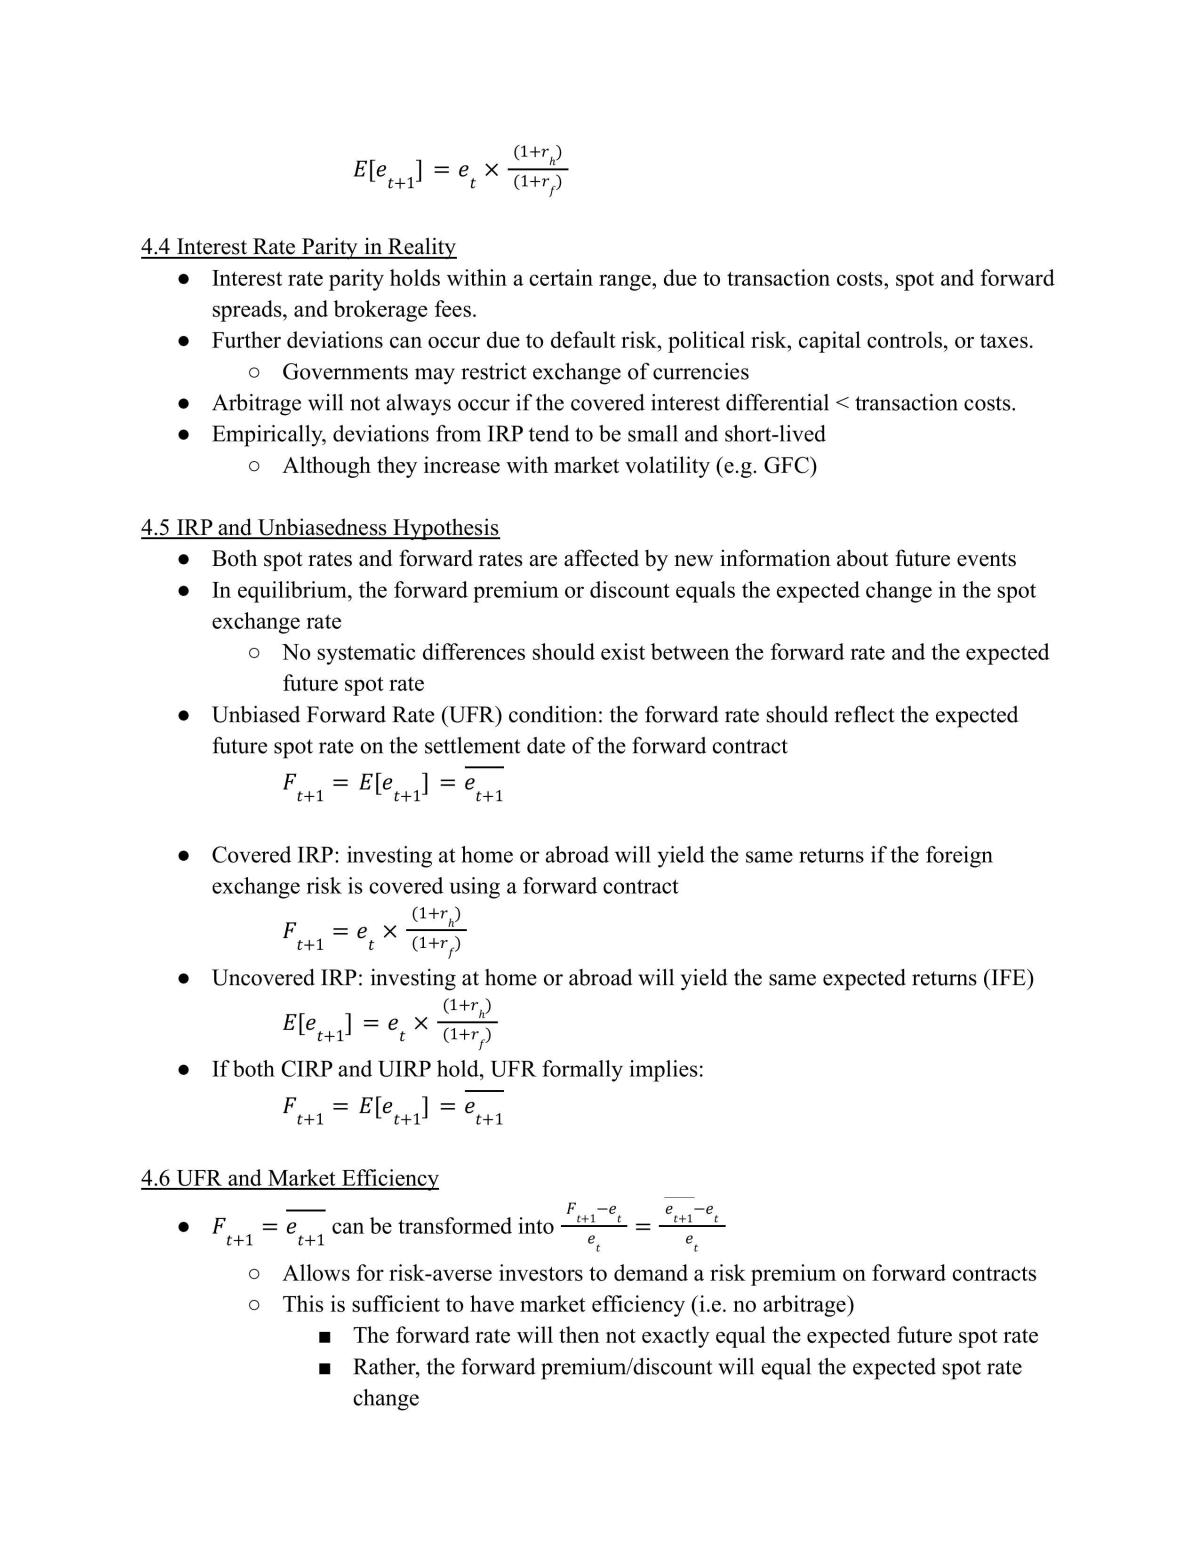 FINS3616 T1 2021 Study Notes - Page 20